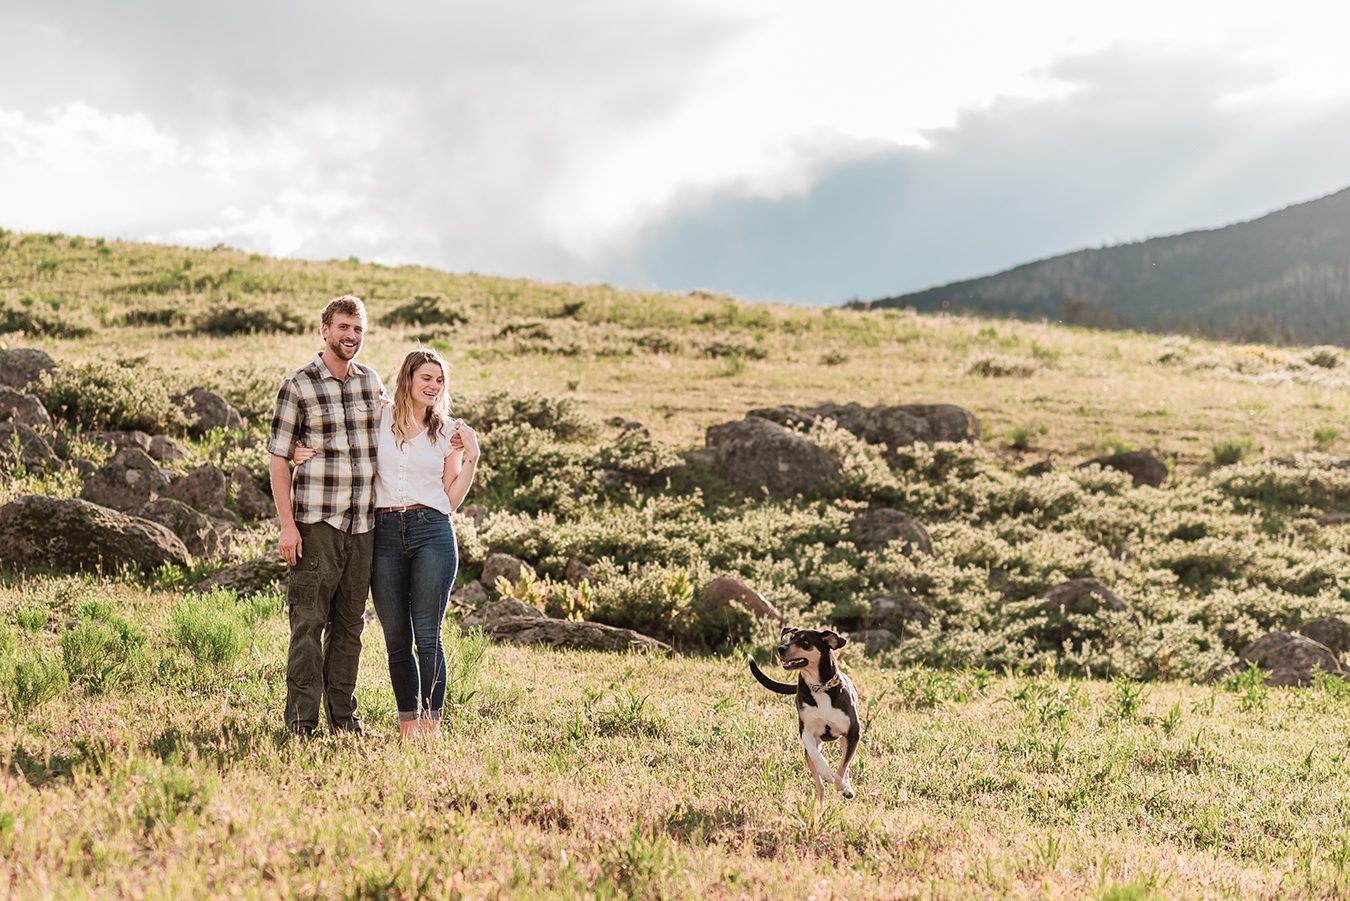 Annie & Taylor with their pup Seeger for an engagement photo session outside Glenwood Springs